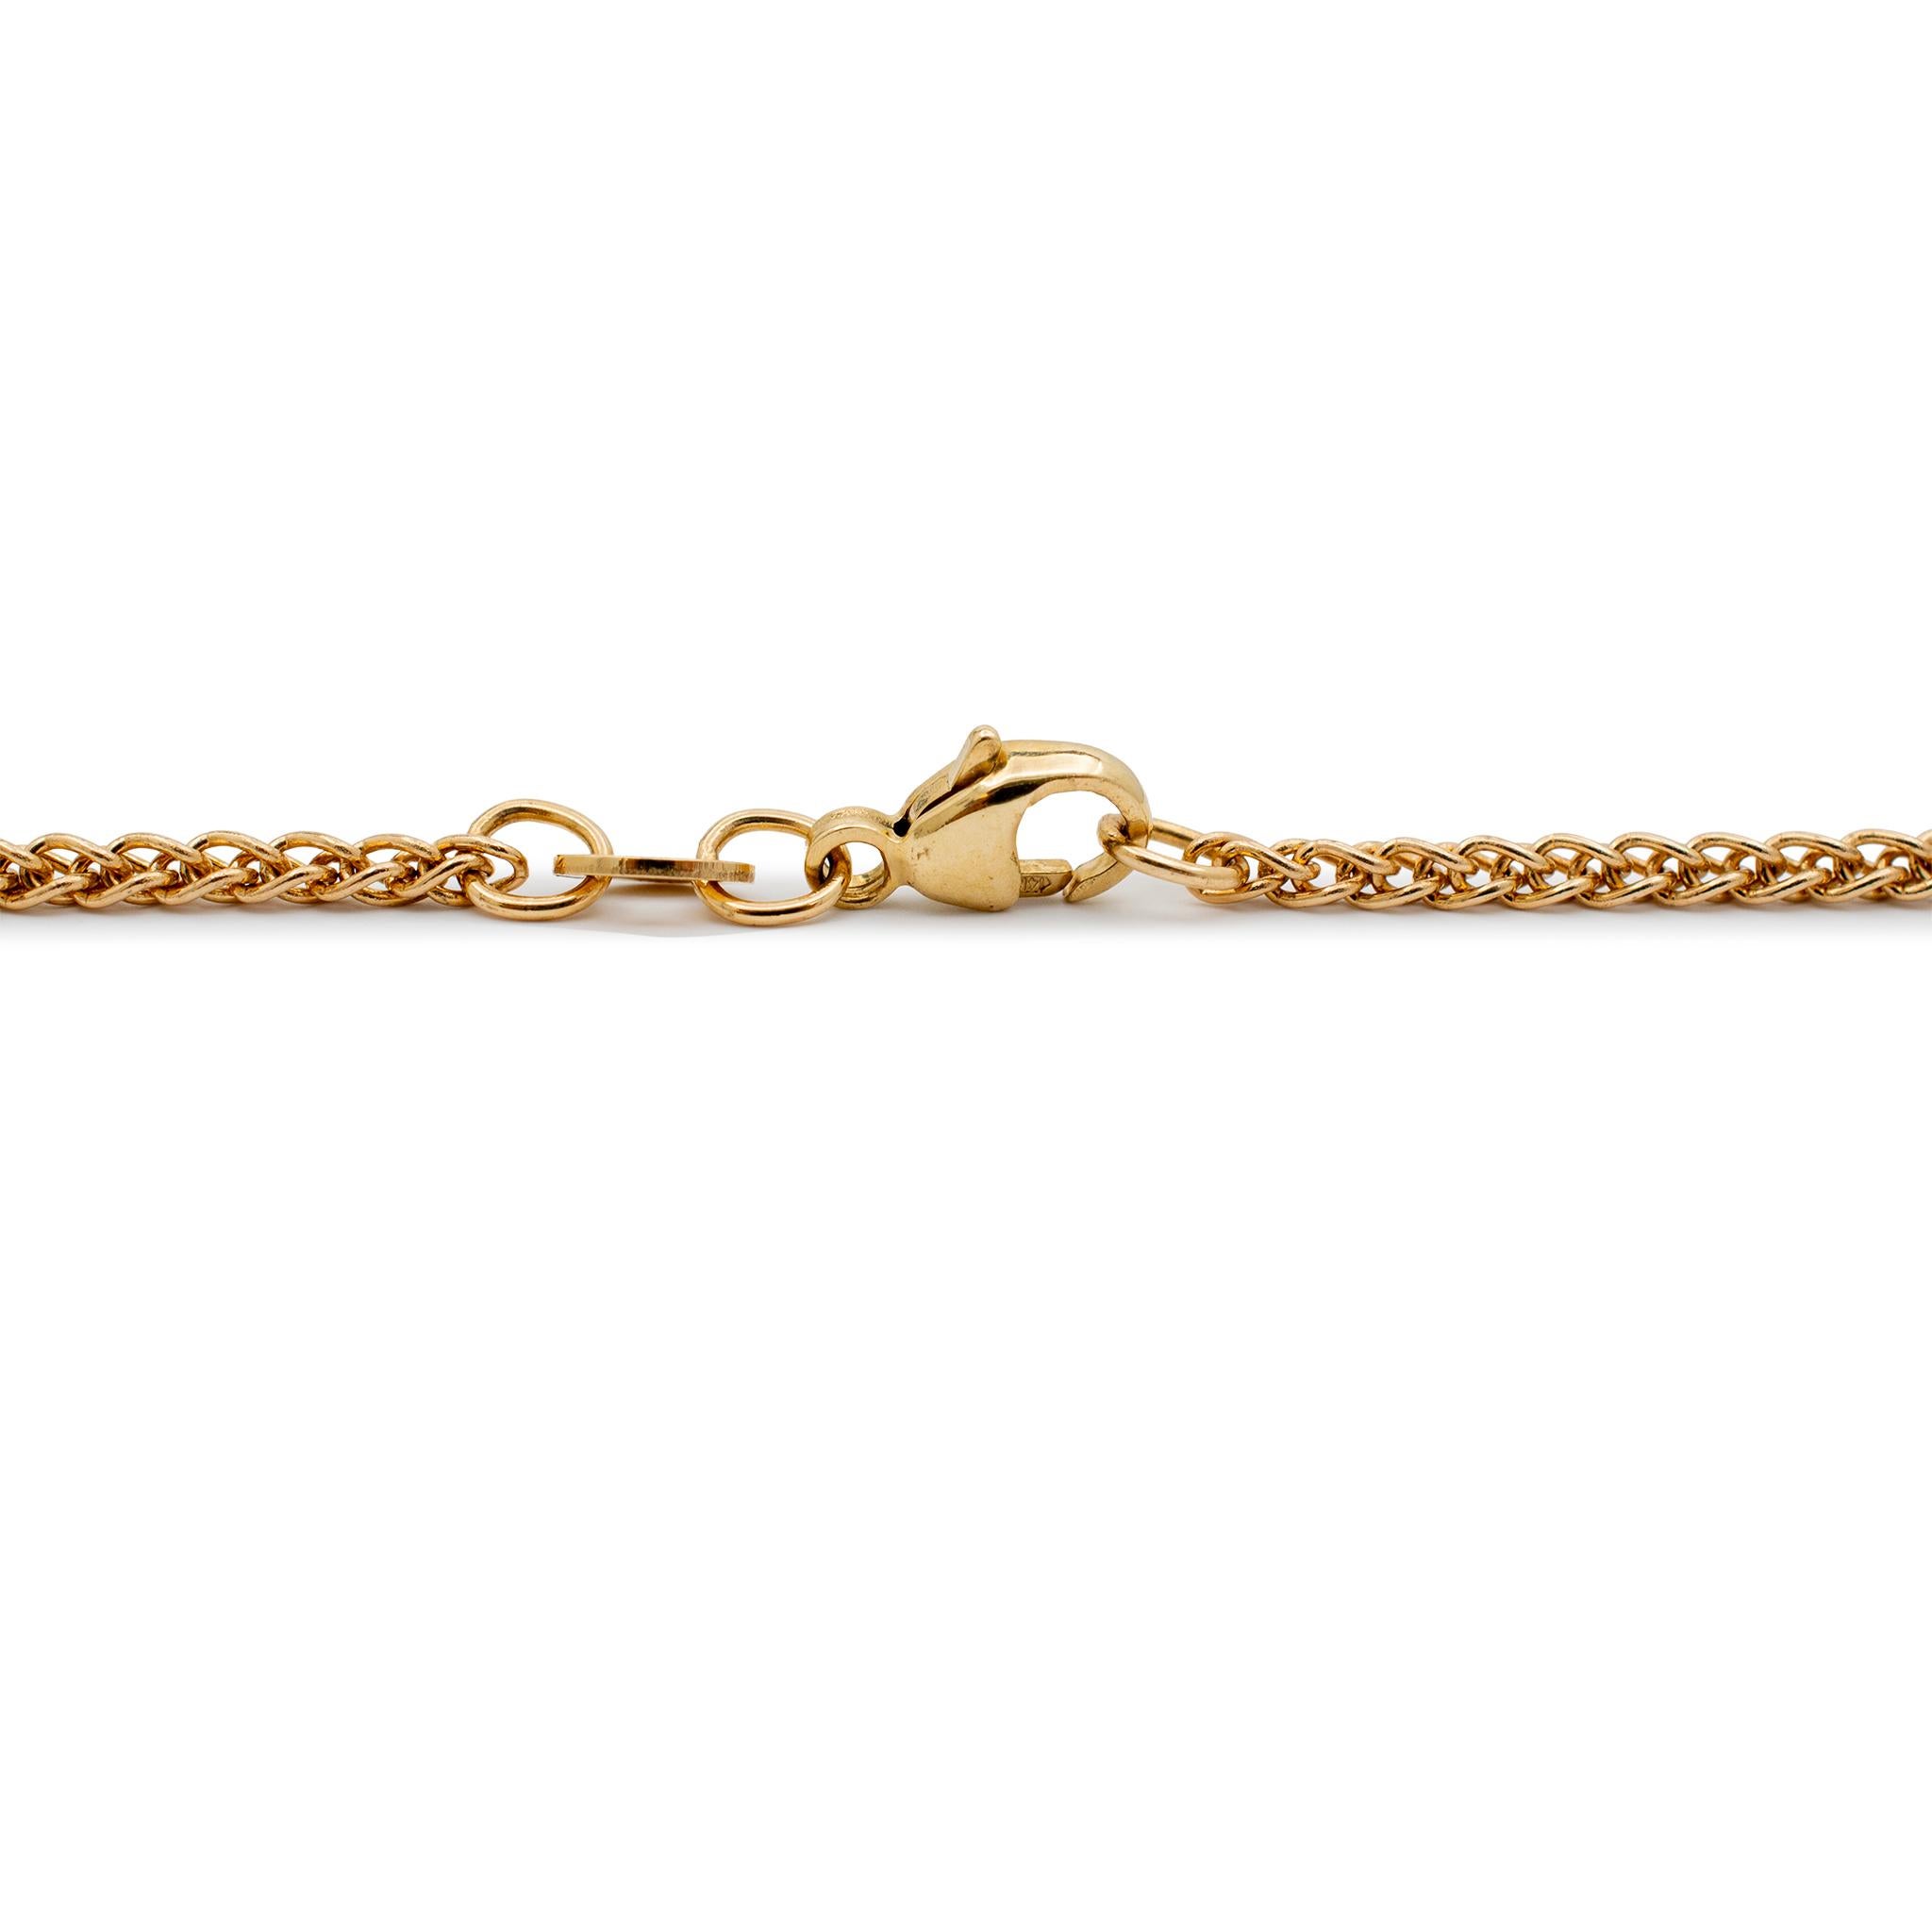 Brand: James Avery

Gender: Ladies

Metal Type: 14K Yellow Gold

Length: 20.00 Inches

Width: 1.90 mm

Weight: 6.80 grams

Ladies 14K yellow gold spiga link chain. Stamped 